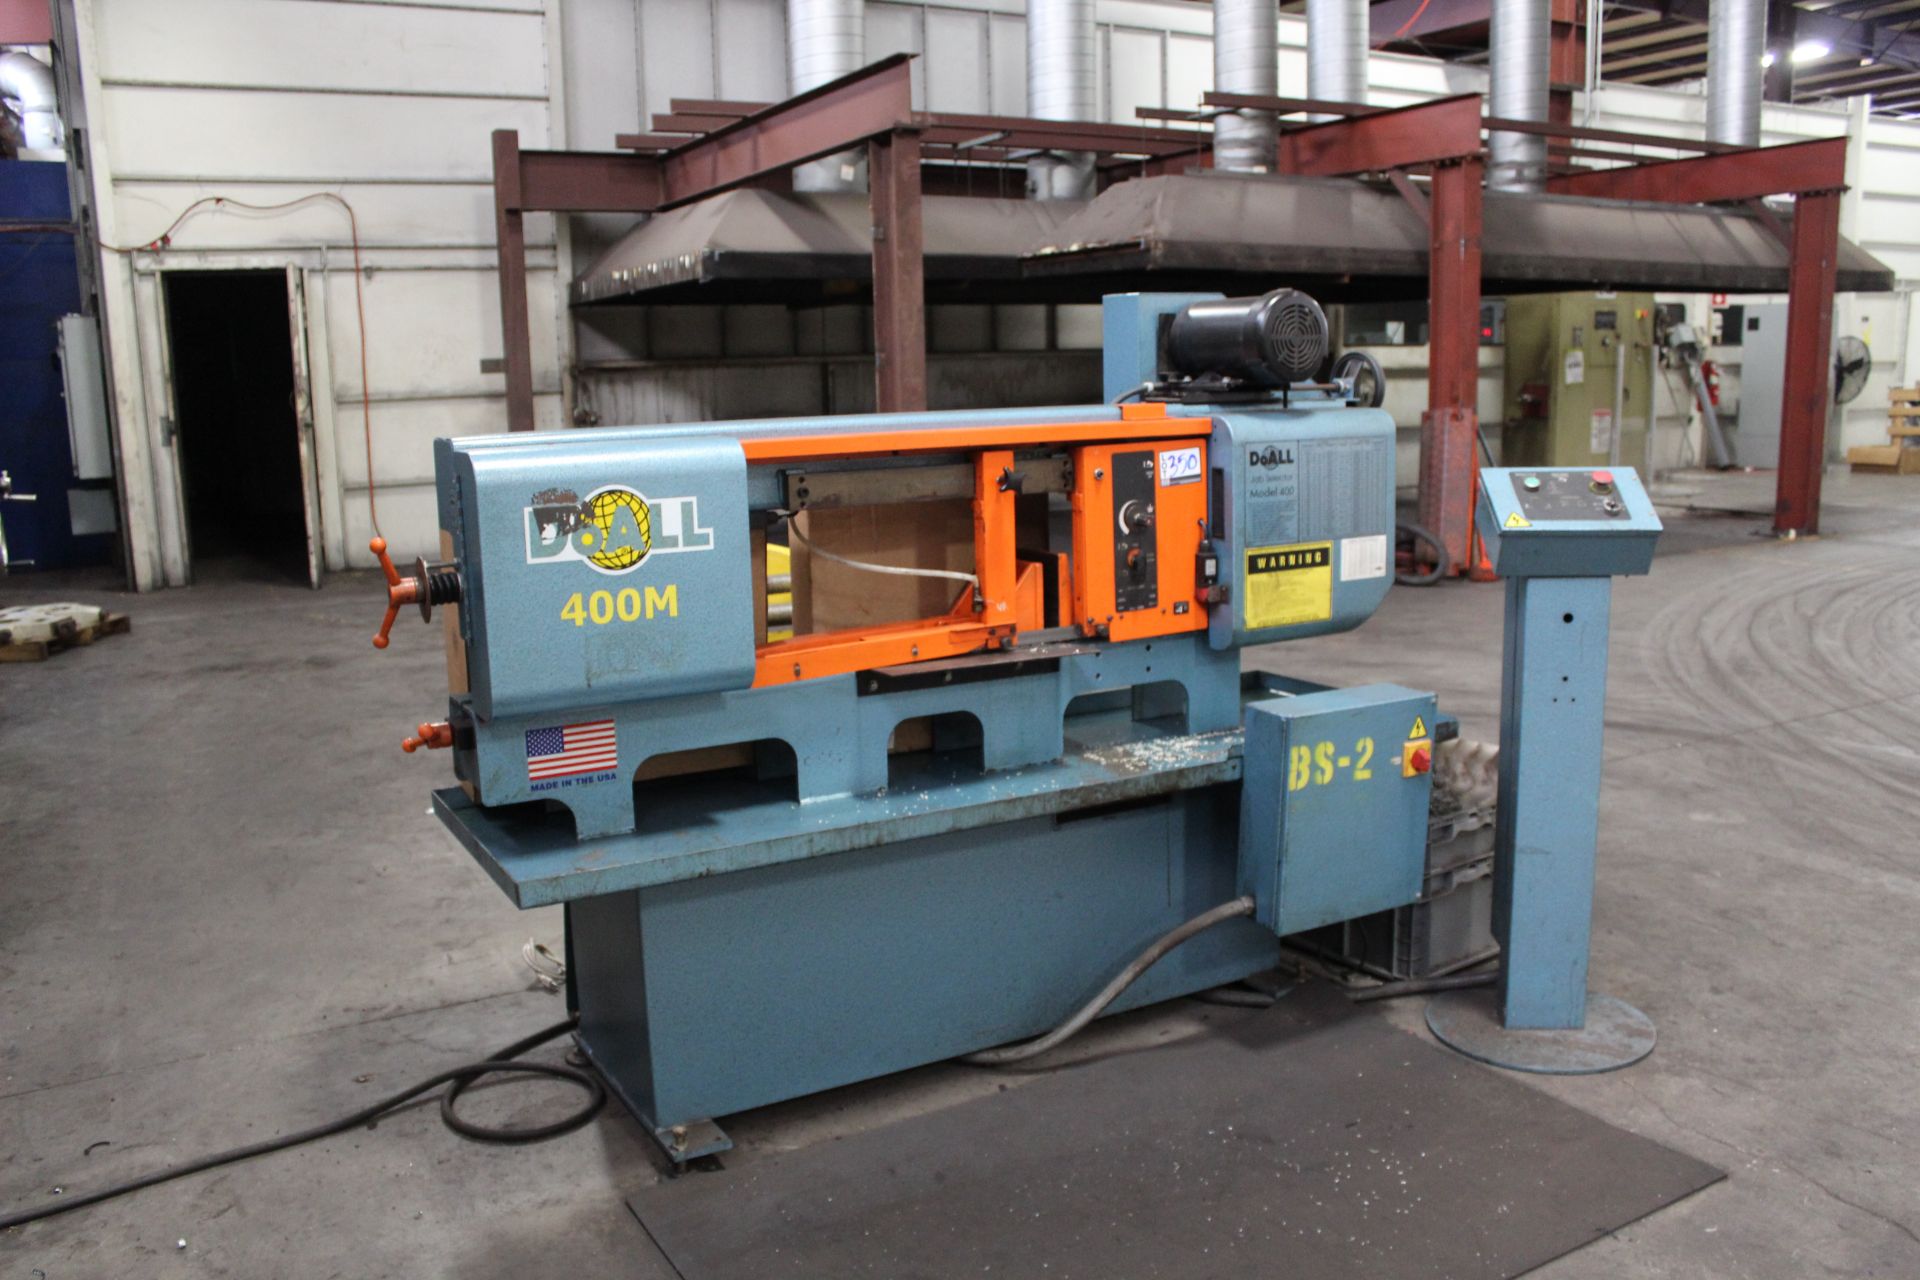 DoAll 400M Horizontal Band Saw, 9” x 16” capacity, infeed table, s/n 596-14485, New 2014 - Image 2 of 3